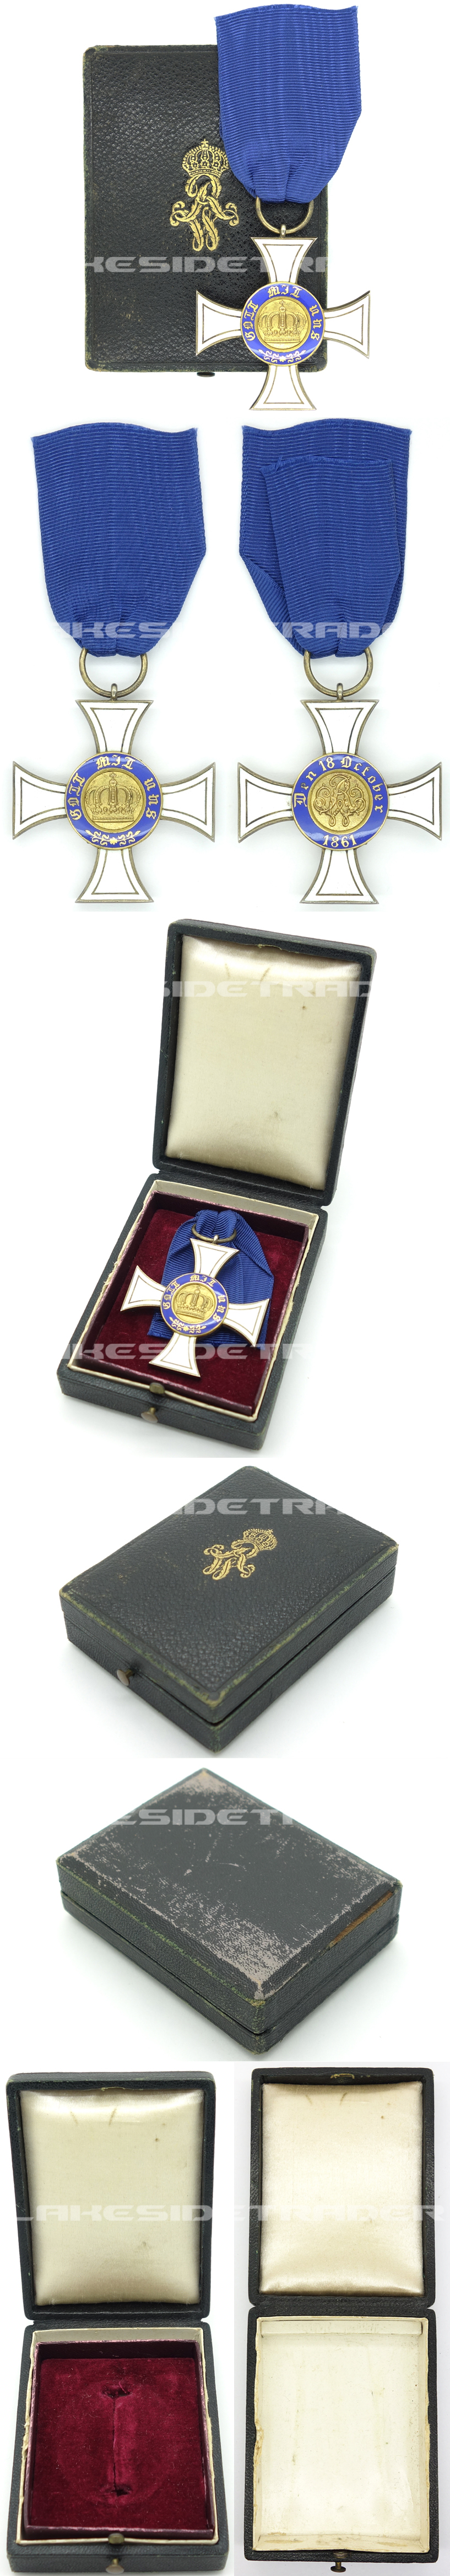 Cased Prussian 3rd Class Order of the Crown